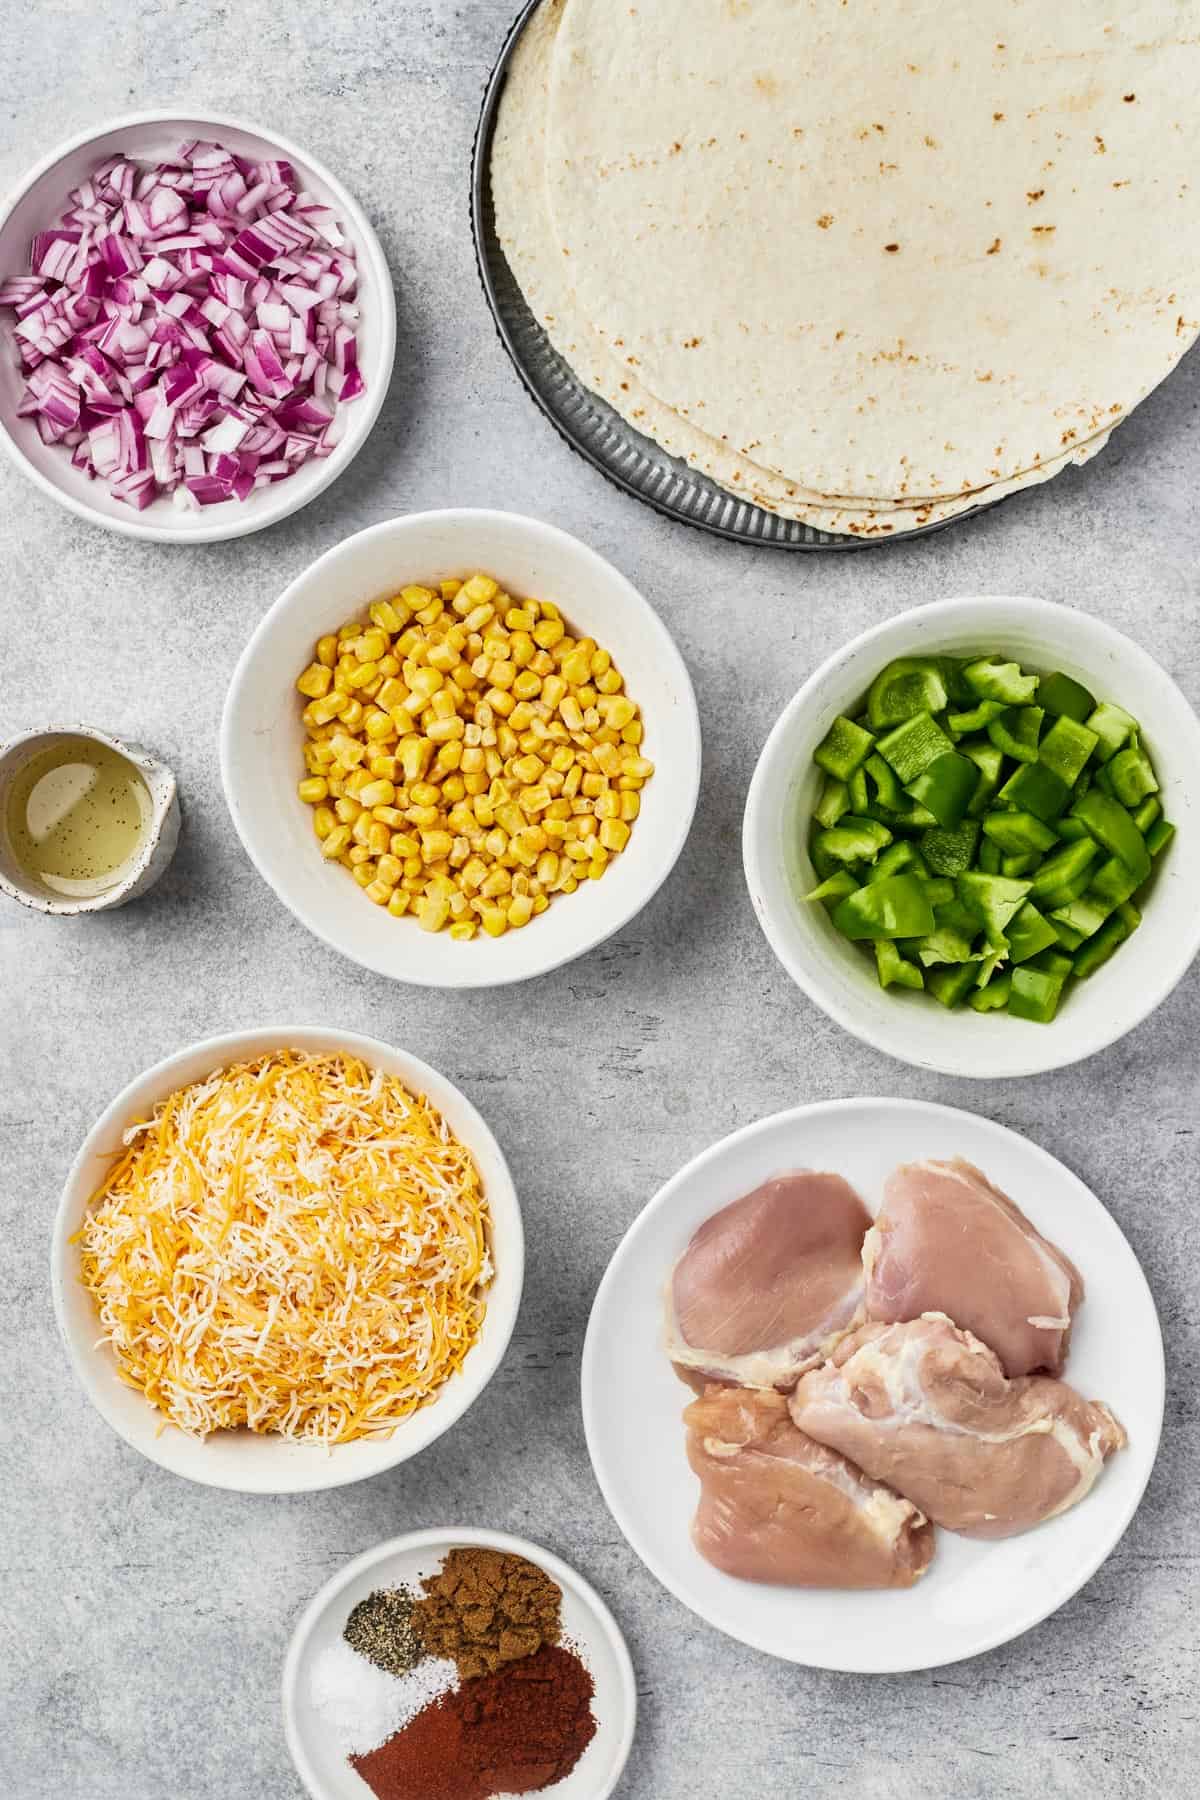 From top left: Red onion, tortillas, oil, corn kernels, bell pepper, cheese, chicken thighs, spices.